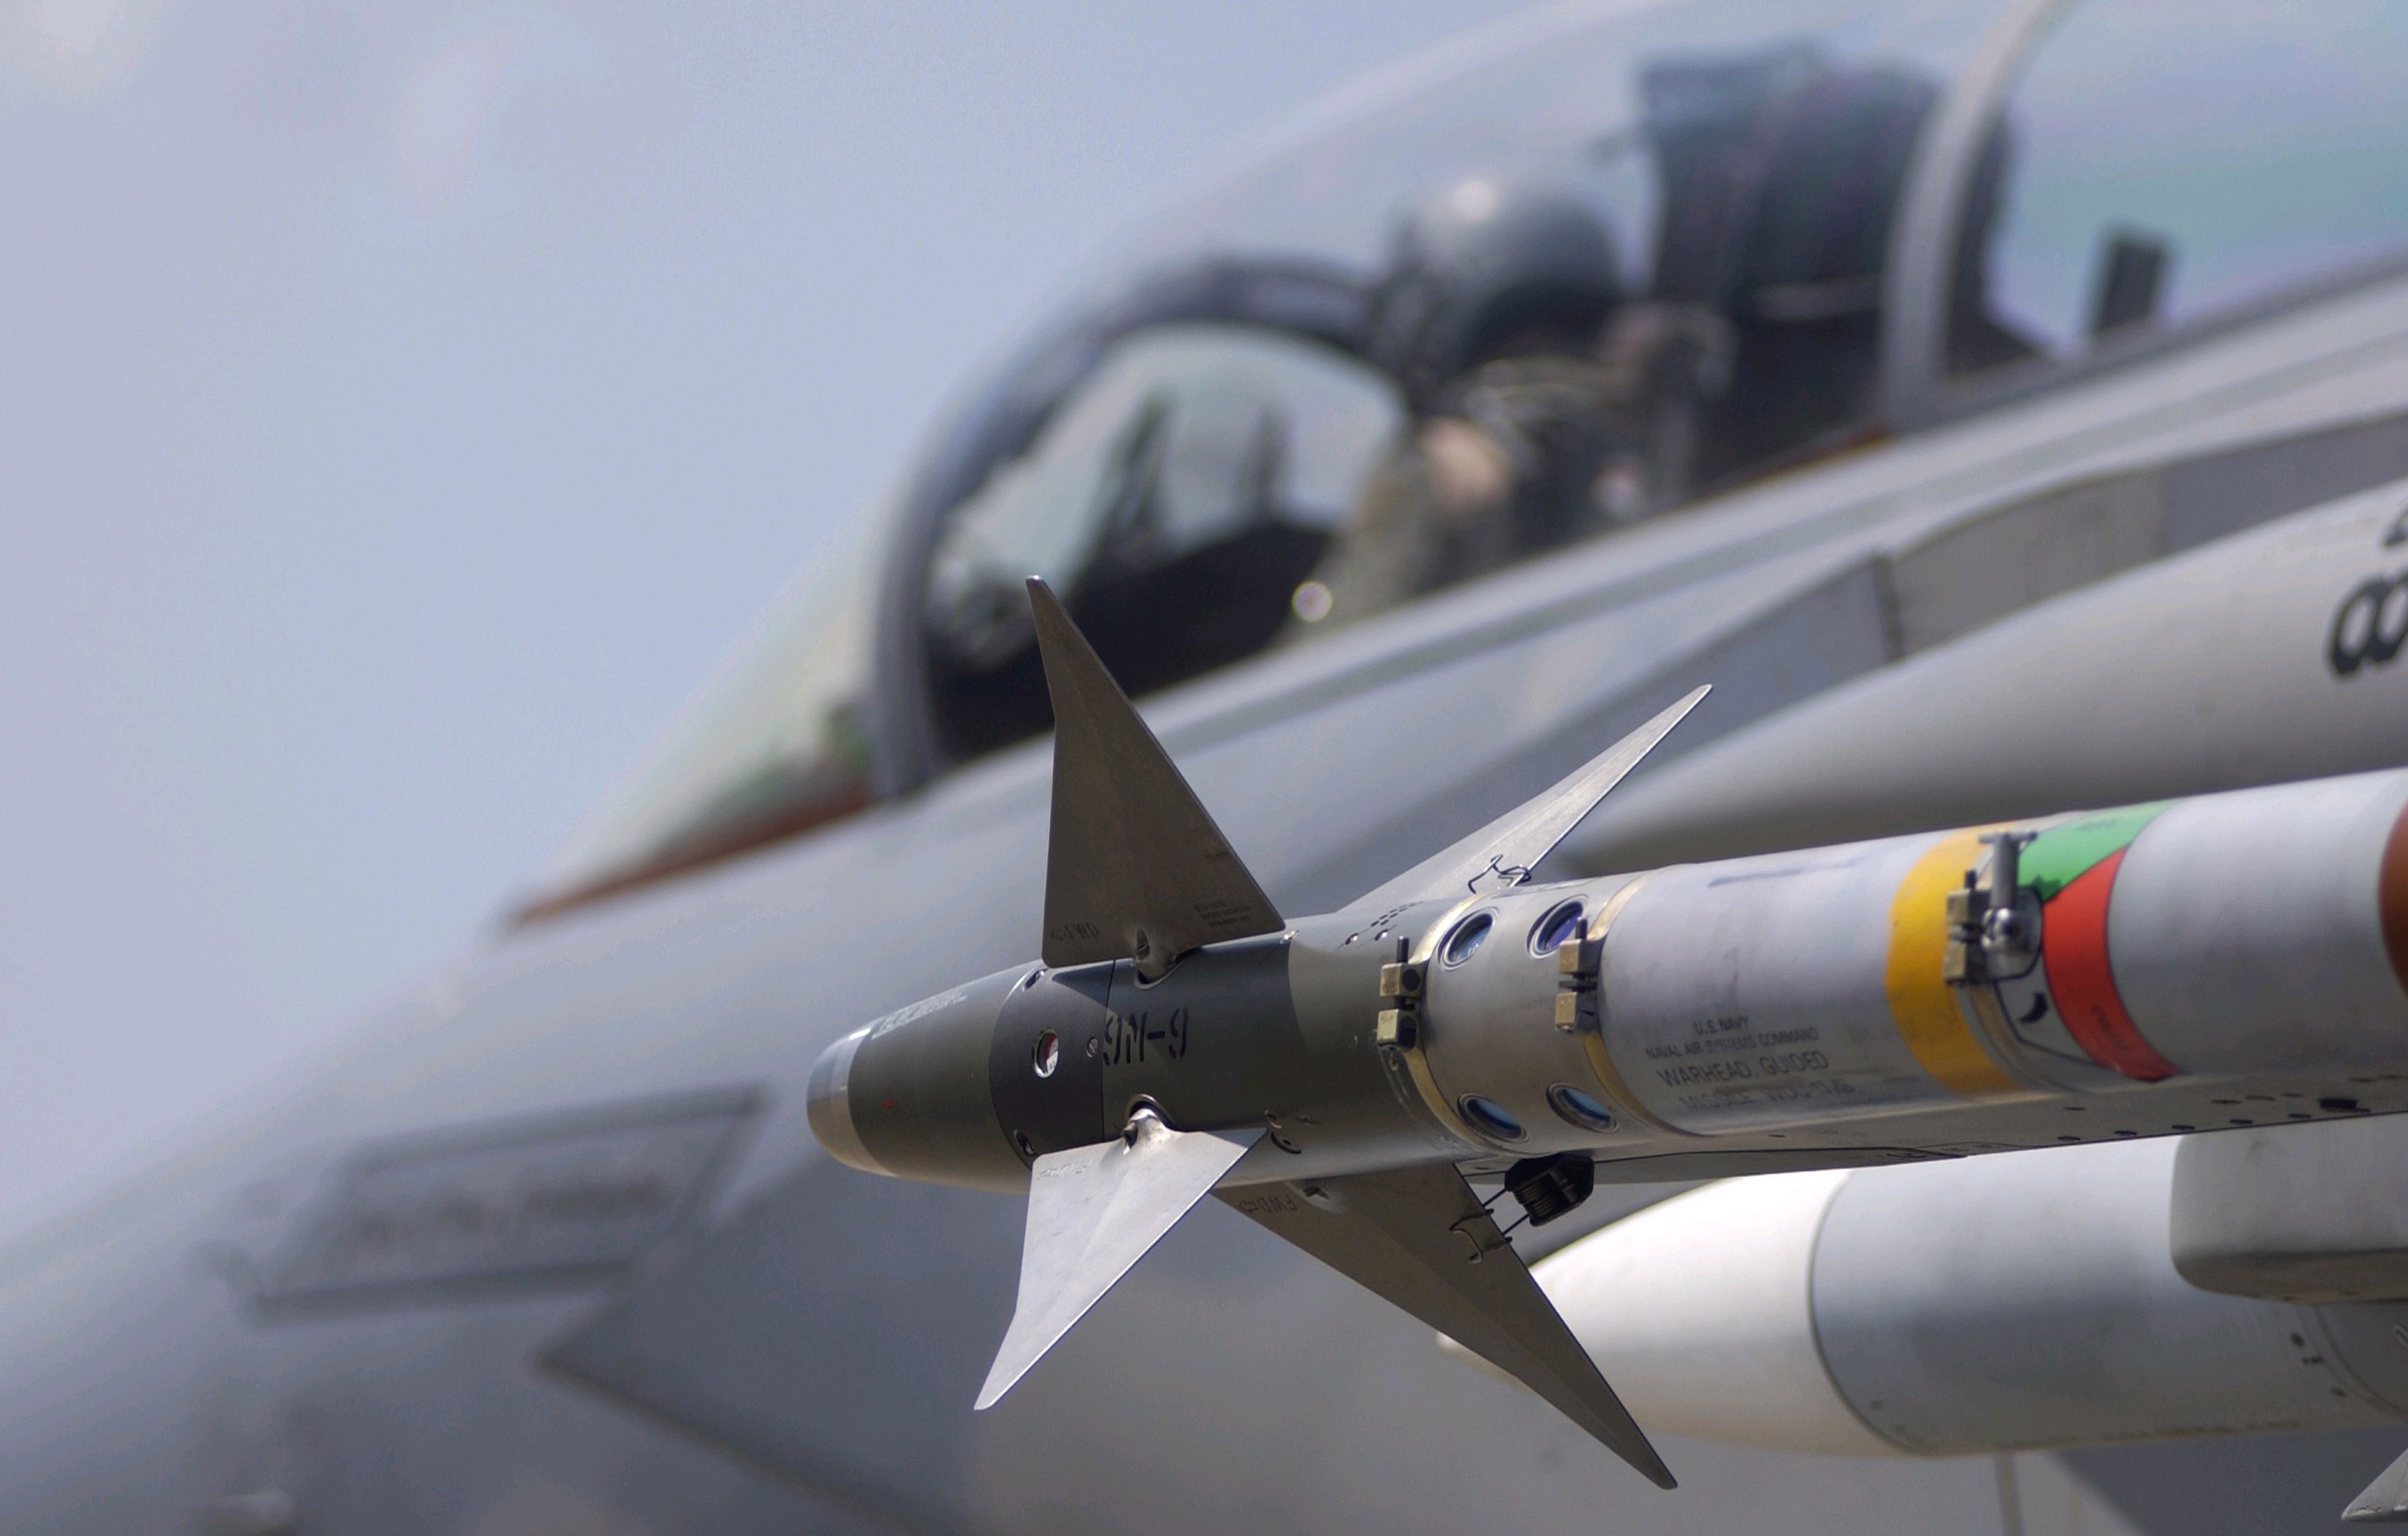 General 2433x1552 military aircraft military aircraft vehicle jets US Air Force F-15 Eagle missiles American aircraft McDonnell Douglas closeup depth of field pilot